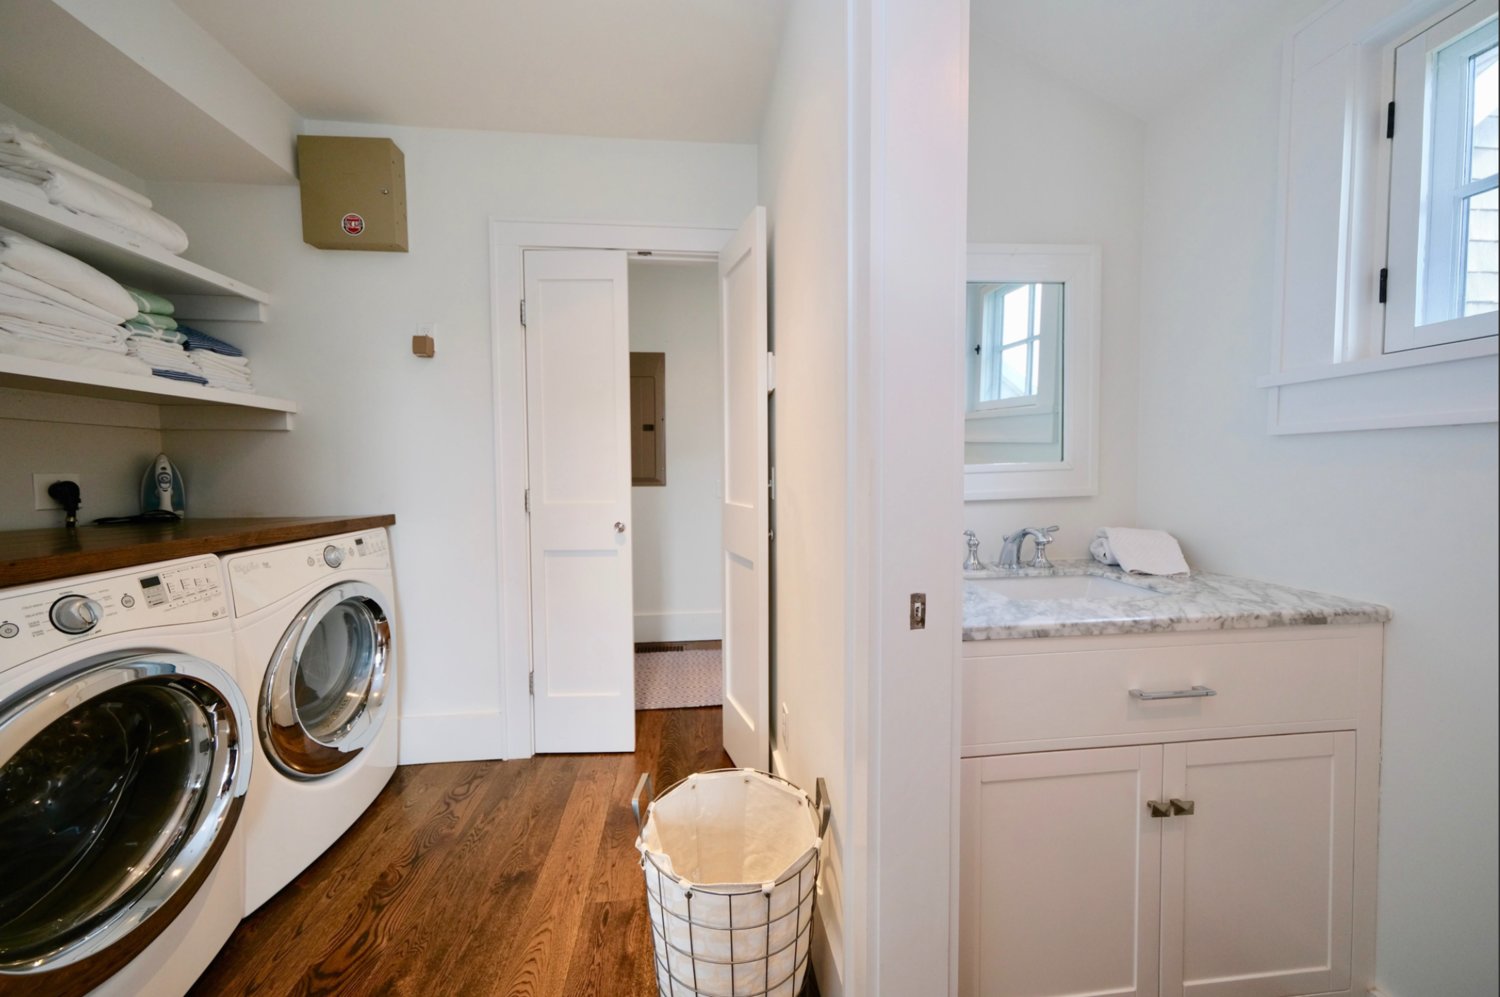 The laundry room has a side-by-side washer and dryer and storage space.